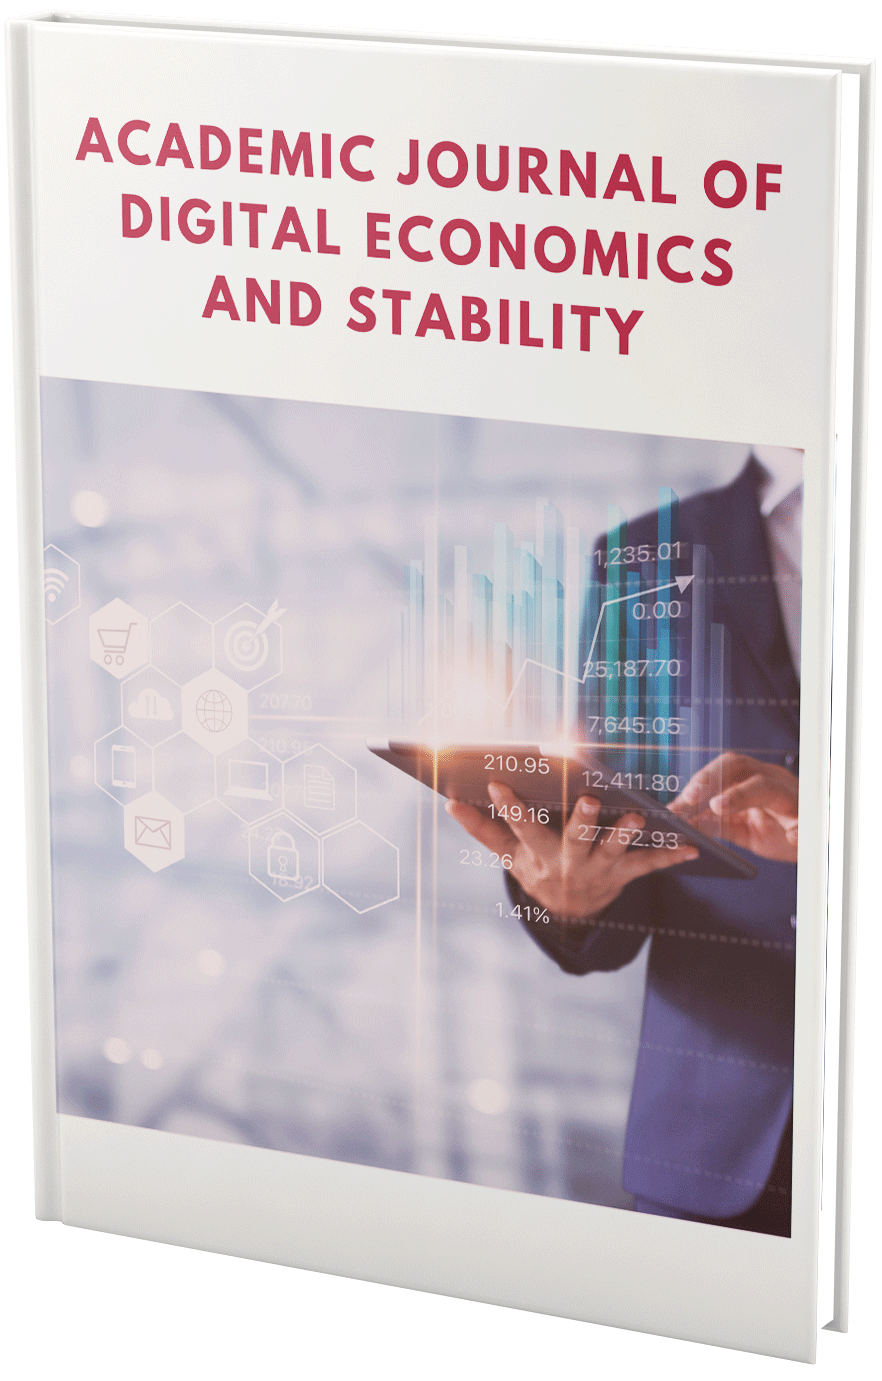 					View Vol. 6 (2021): Academic Journal of Digital Economics and Stability (Spain)
				